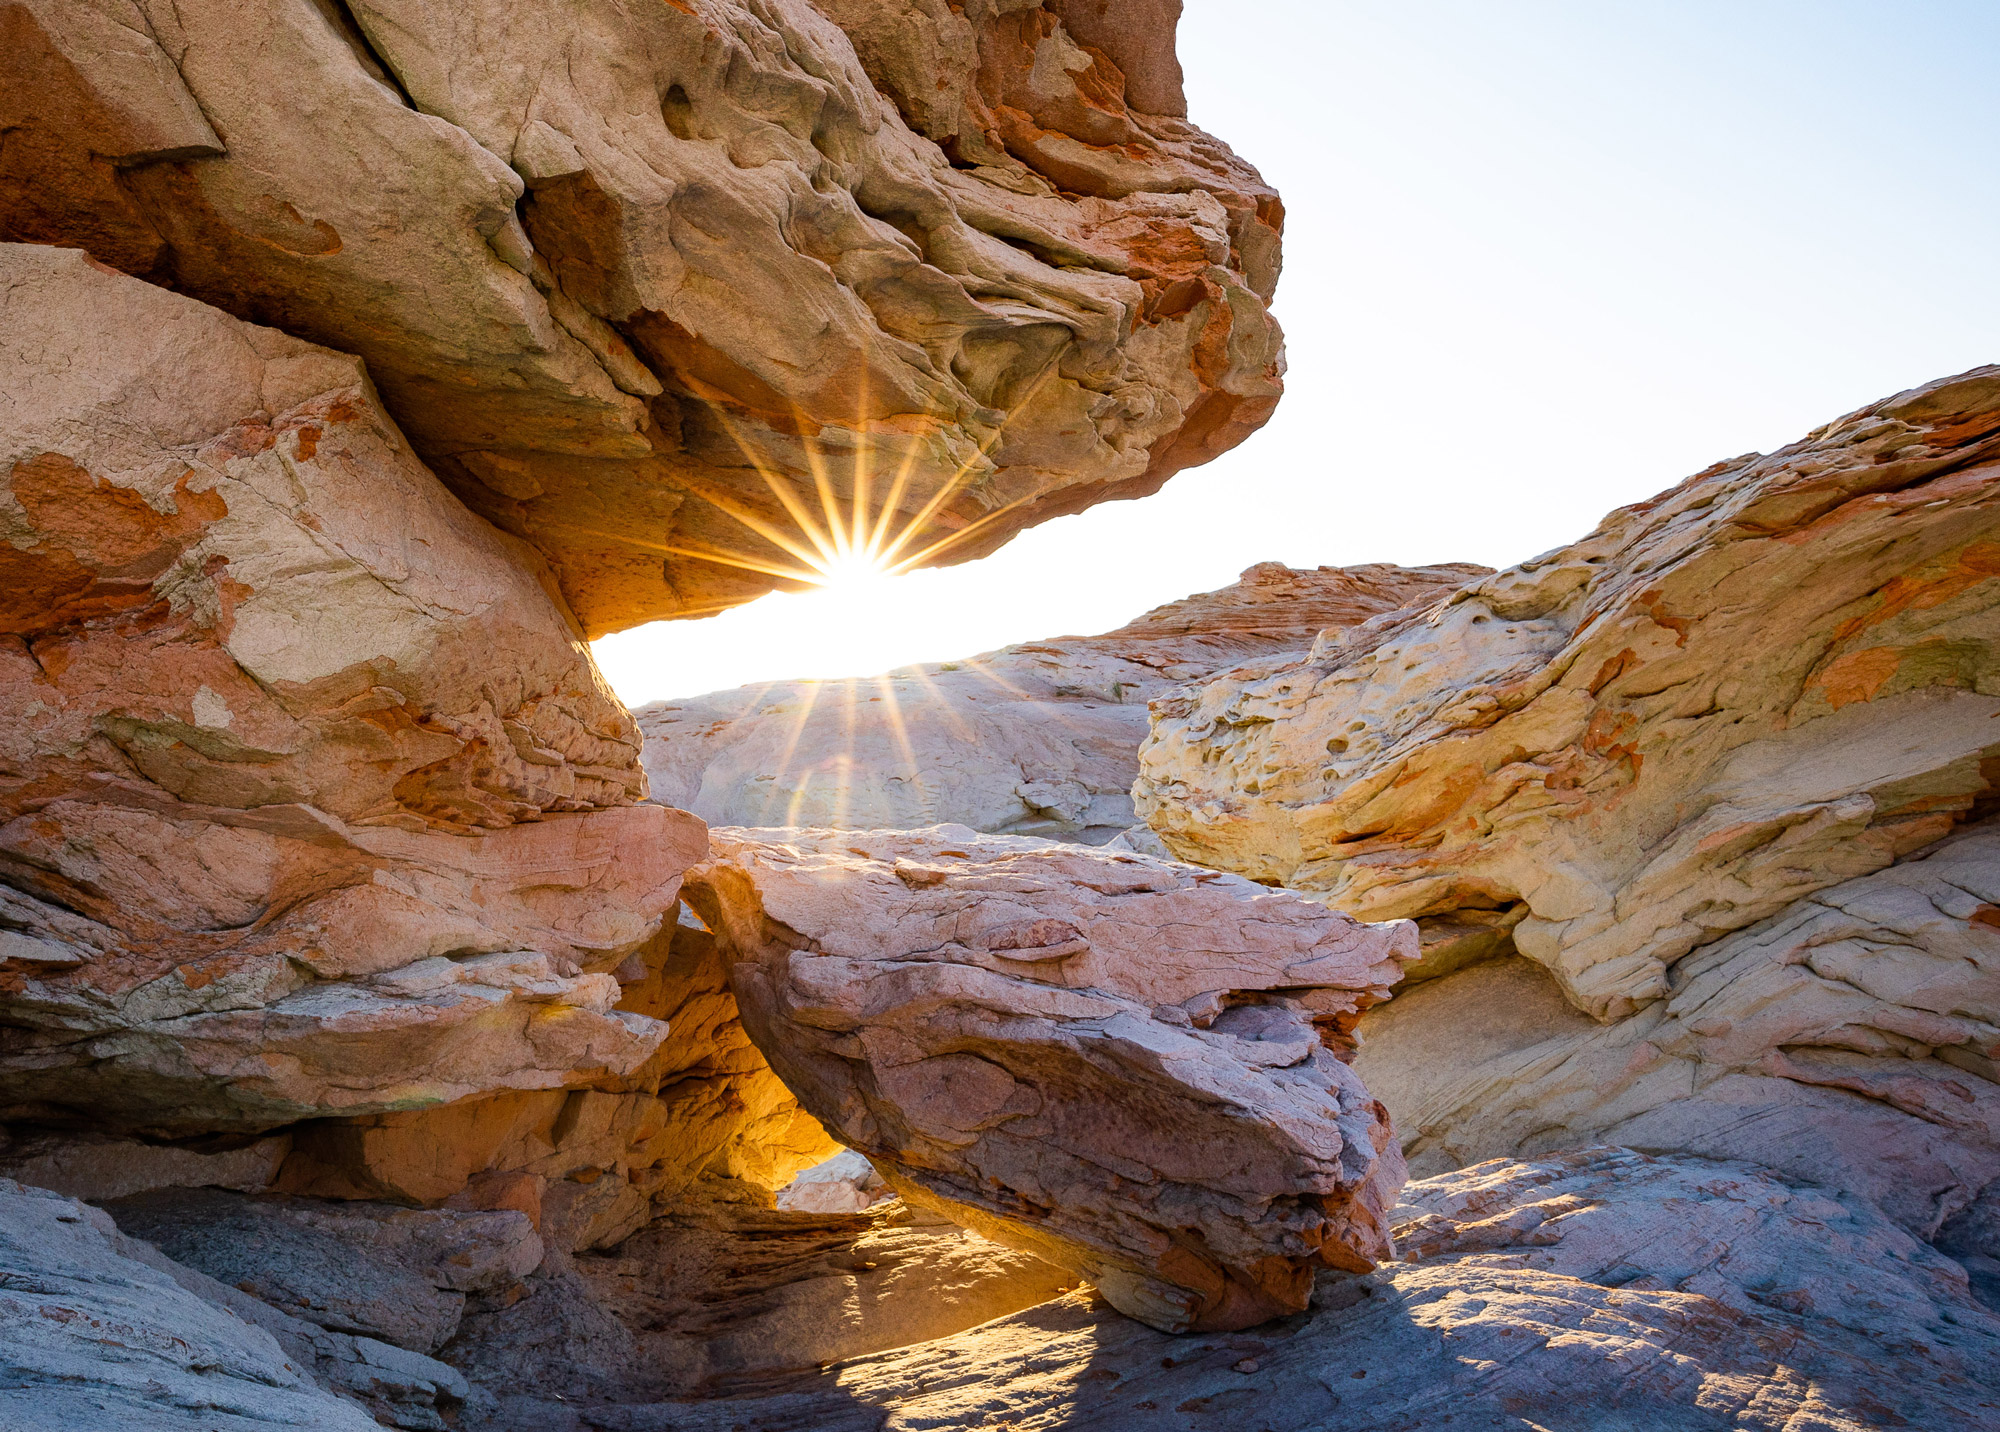 Exploring the Southwest with the Canon RF 14-35mm Lens